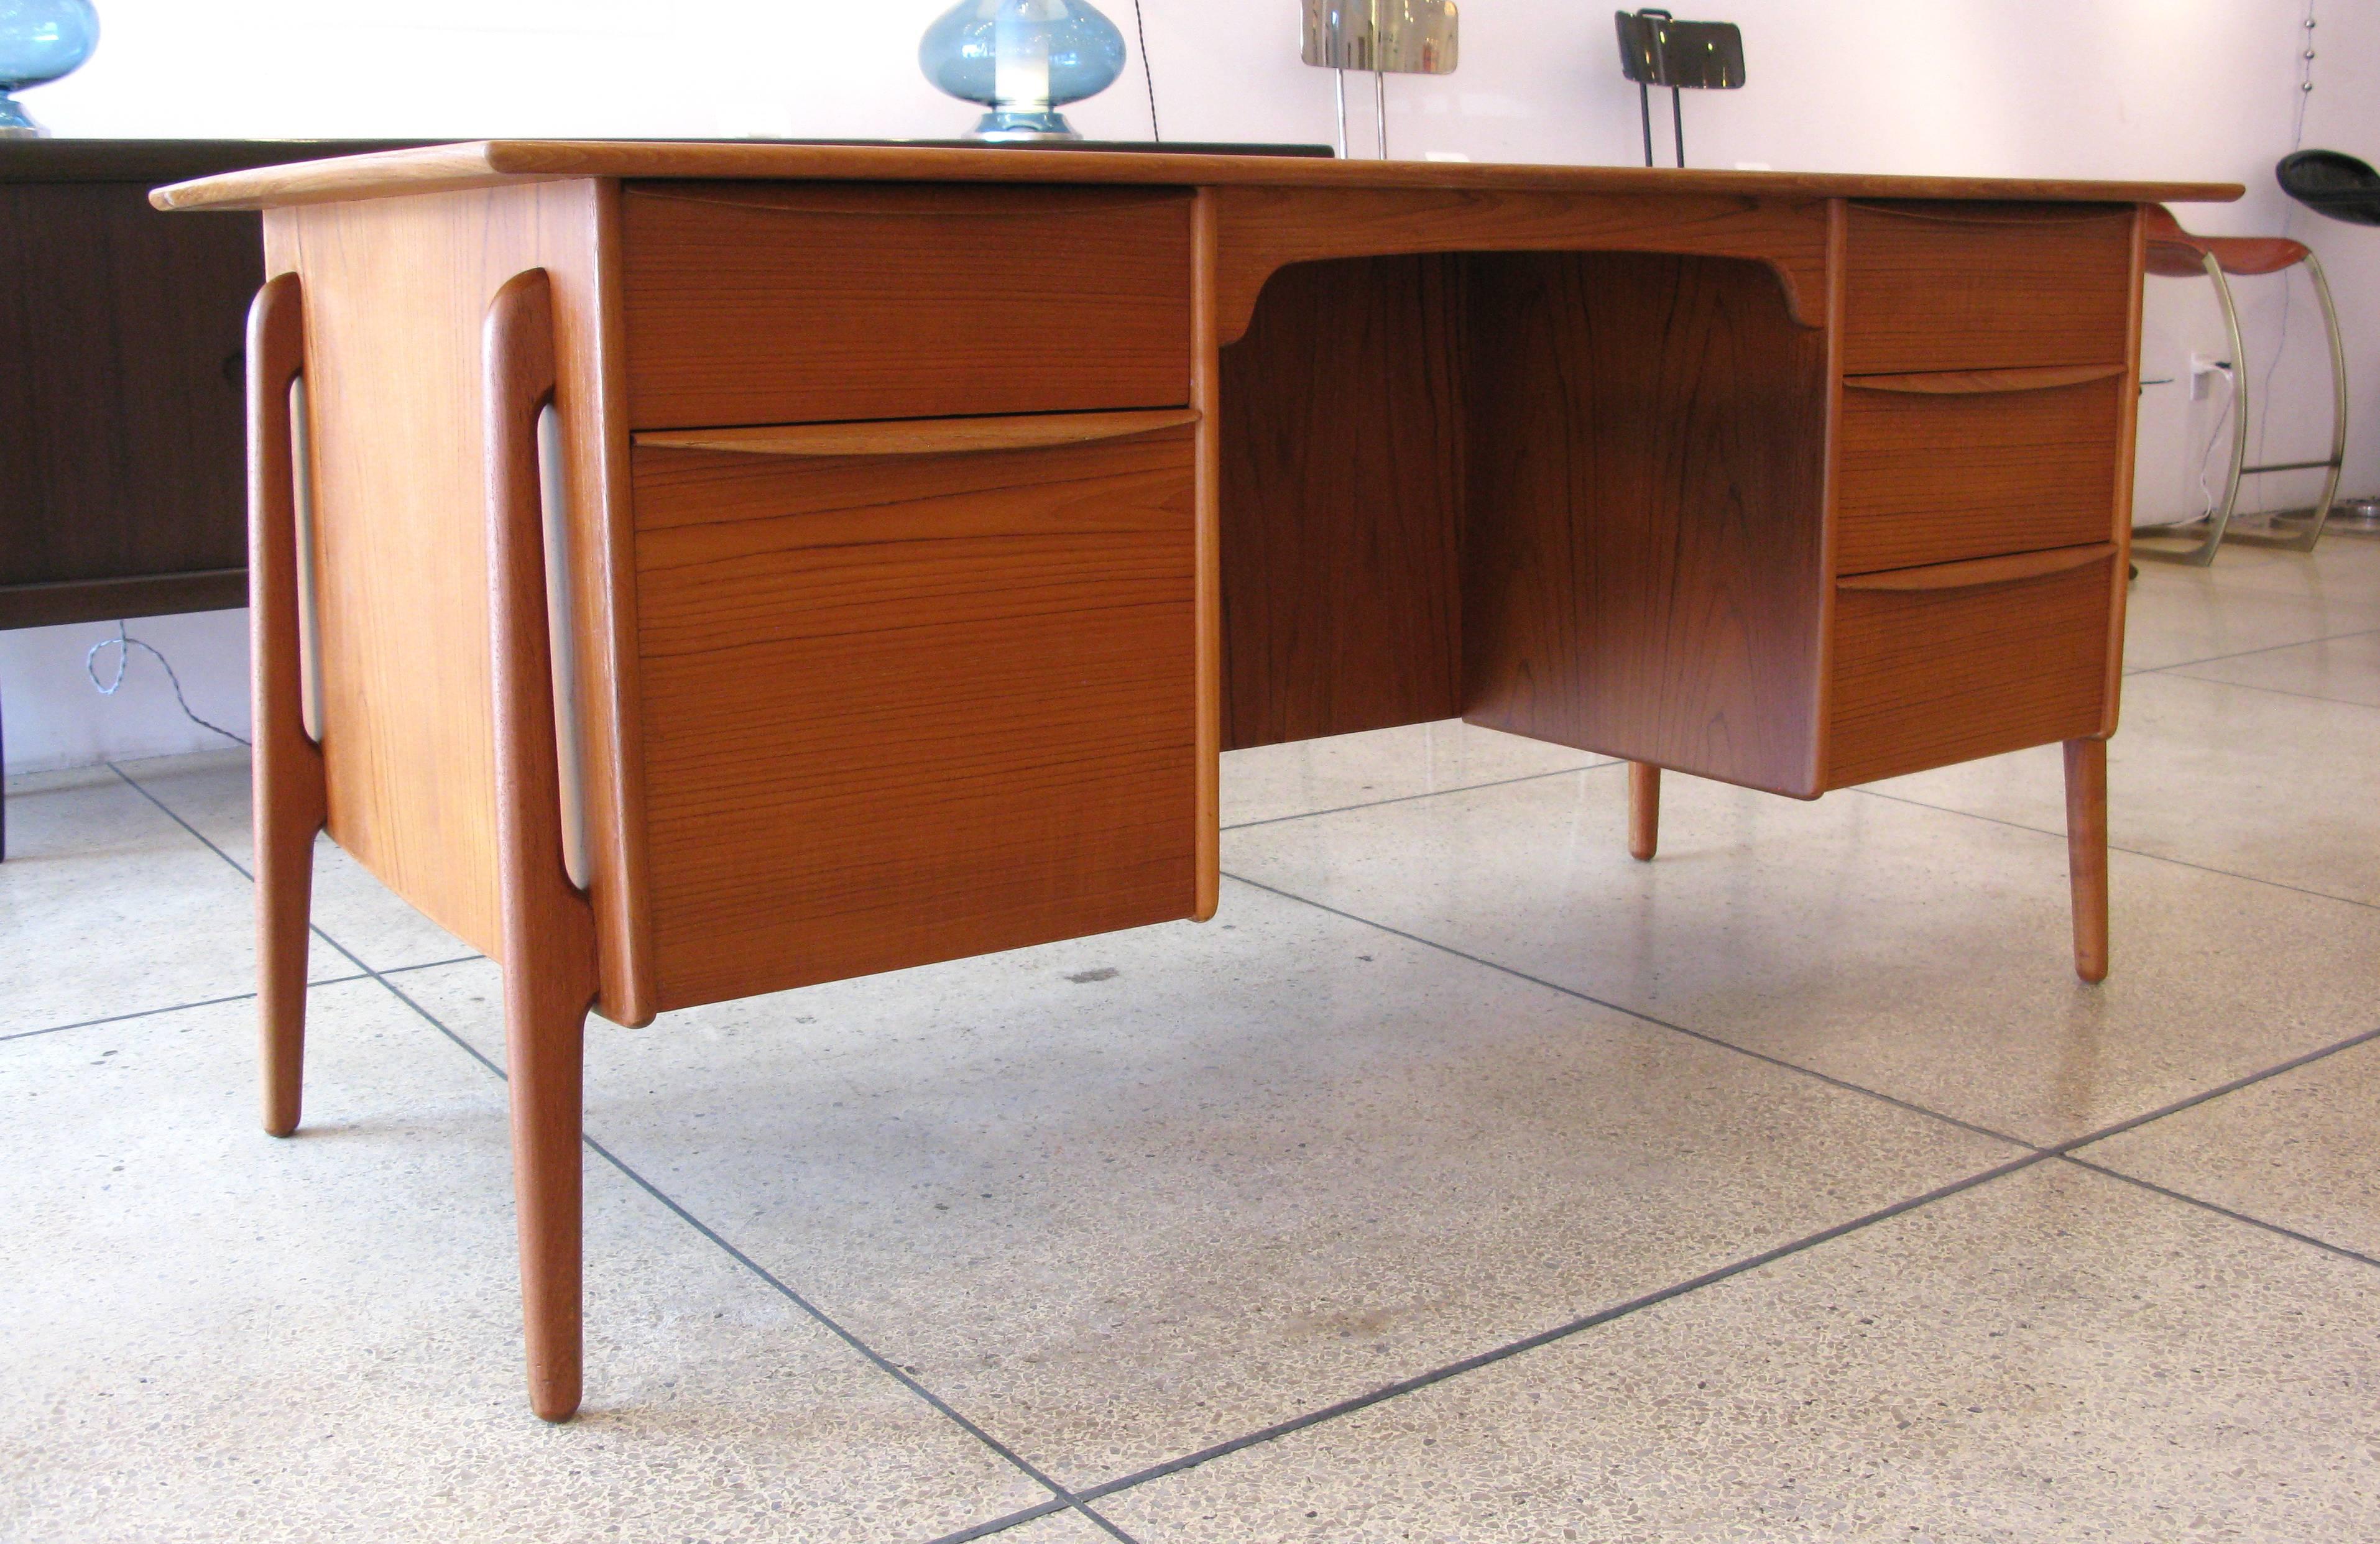 Teak desk designed by renowned architect Svend Aage Madsen for Sigurd Hansen Møbelfabrik. Drop-down top drawer and file drawer on left side. Chair opening measures approximately 22